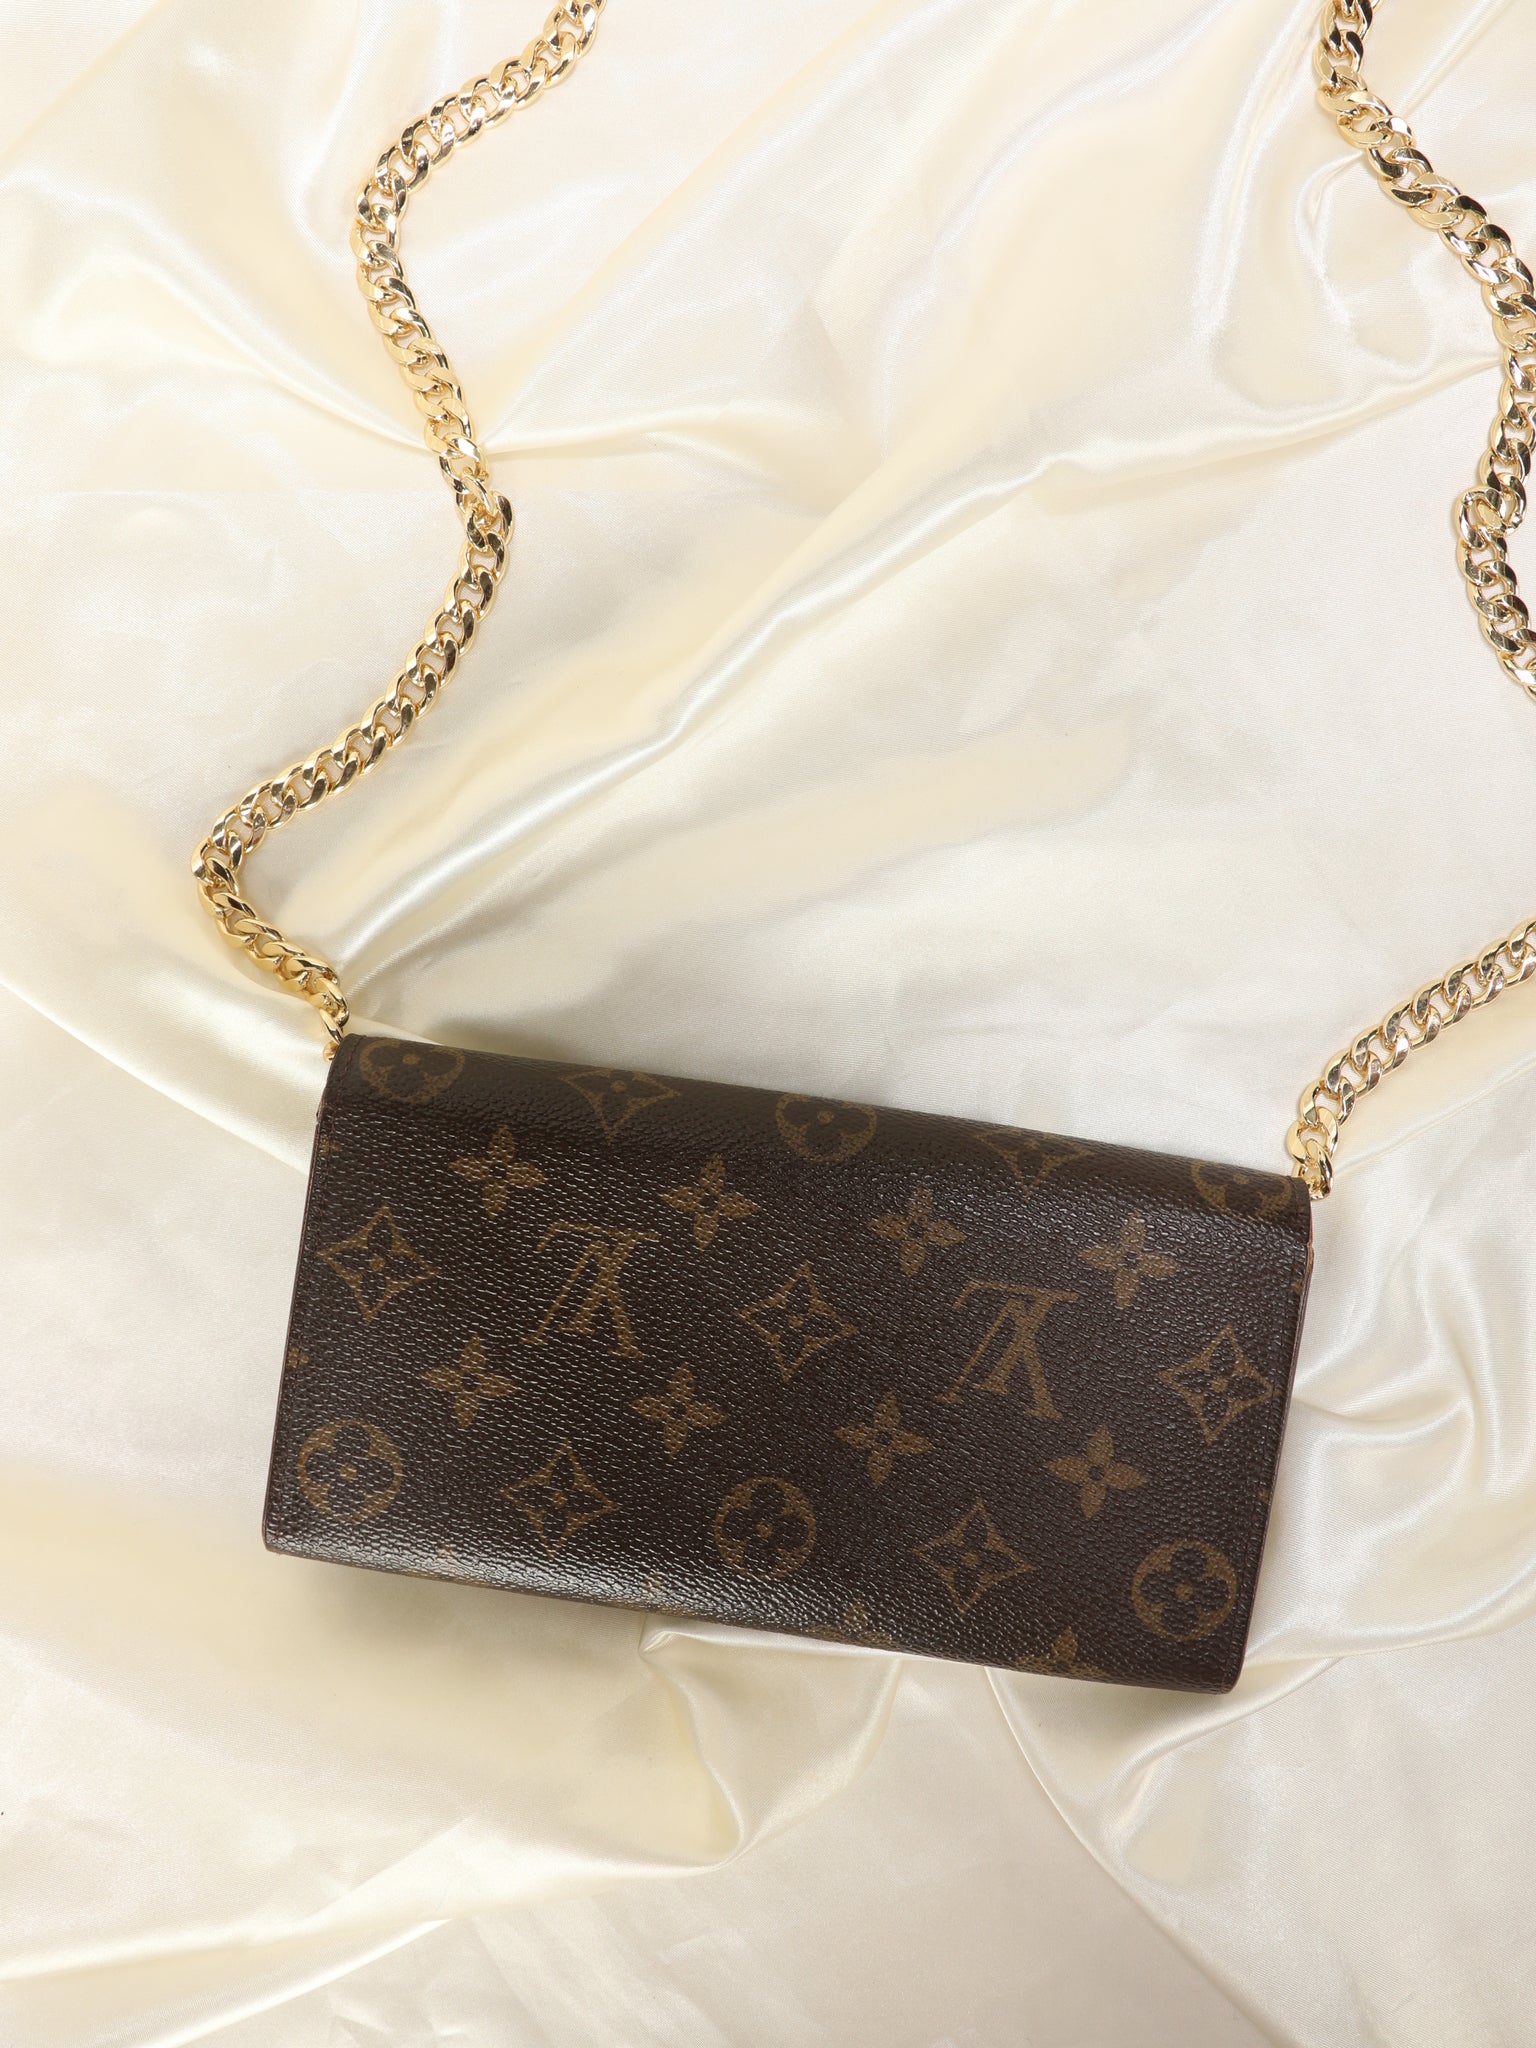 long gold chain for lv purse